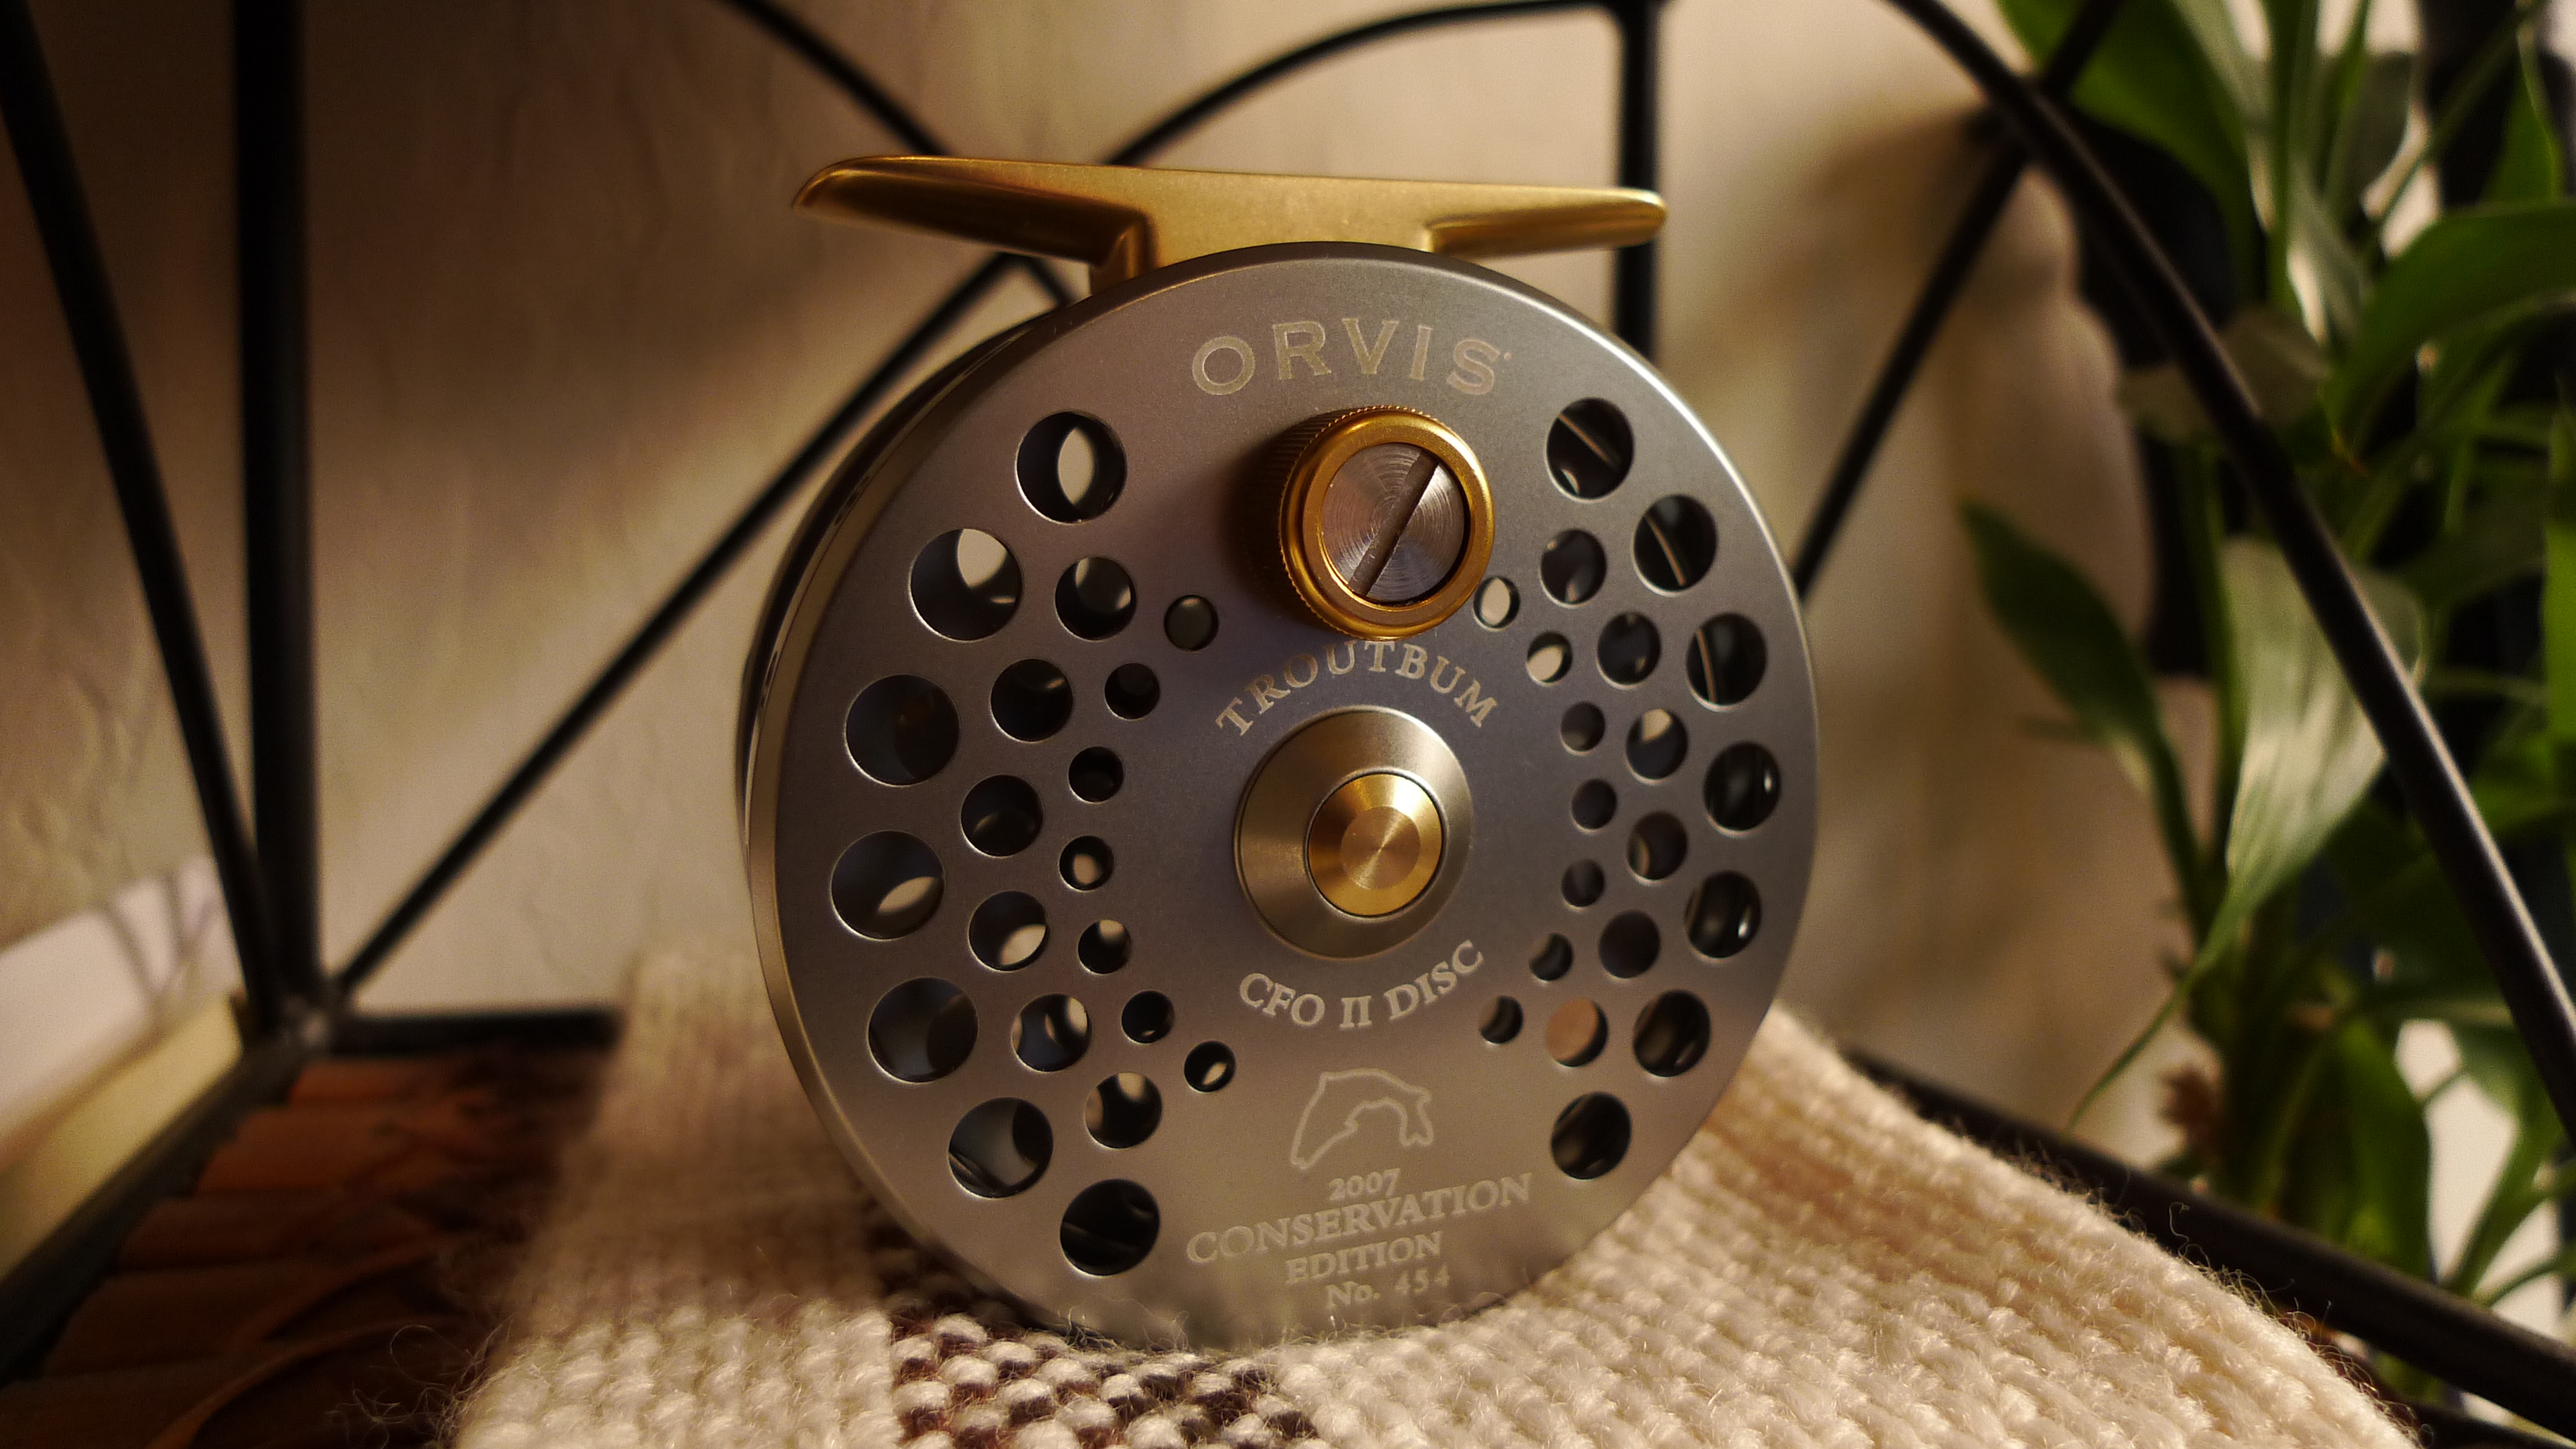 Orvis CFO II Trout Bum Limited Edition Conservation 454/750 – Wanders With  Trout